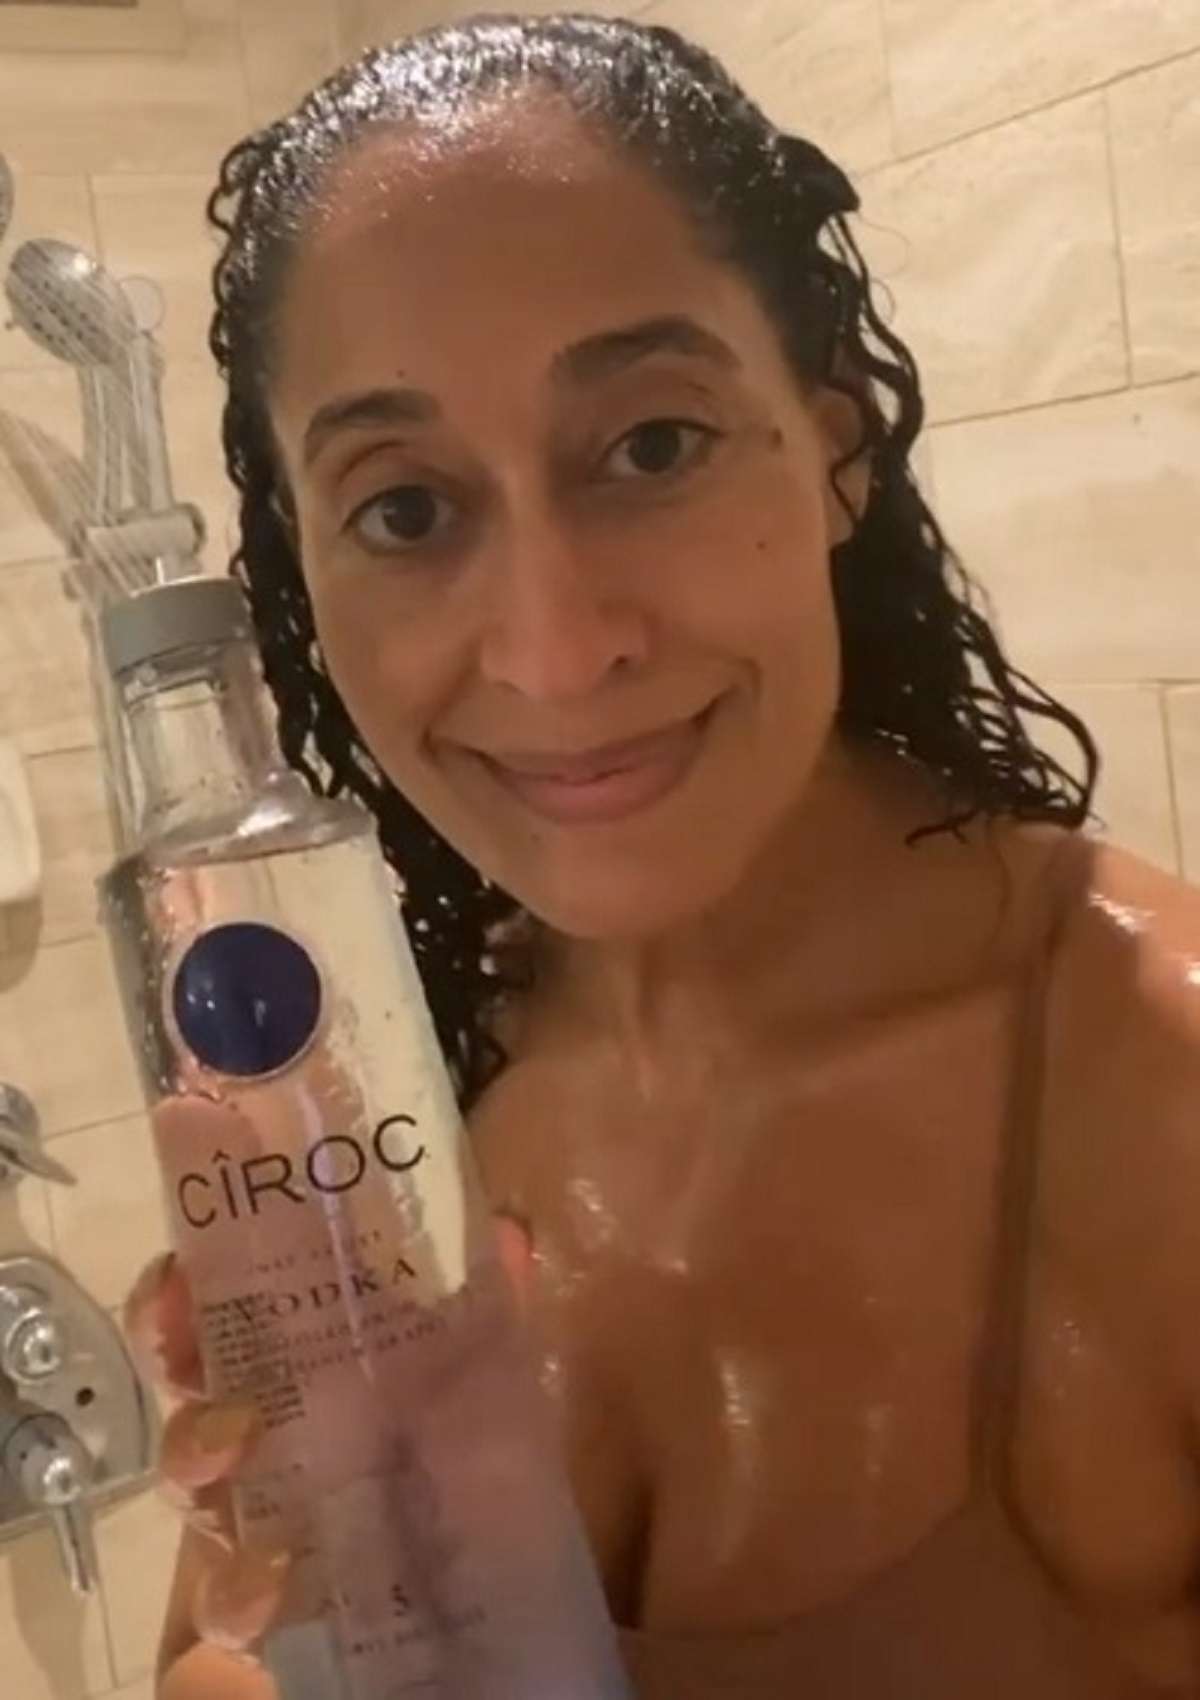 Tracee Ellis Ross Responds To P Diddy By Taking a Shower with a Bottle Of Ciroc